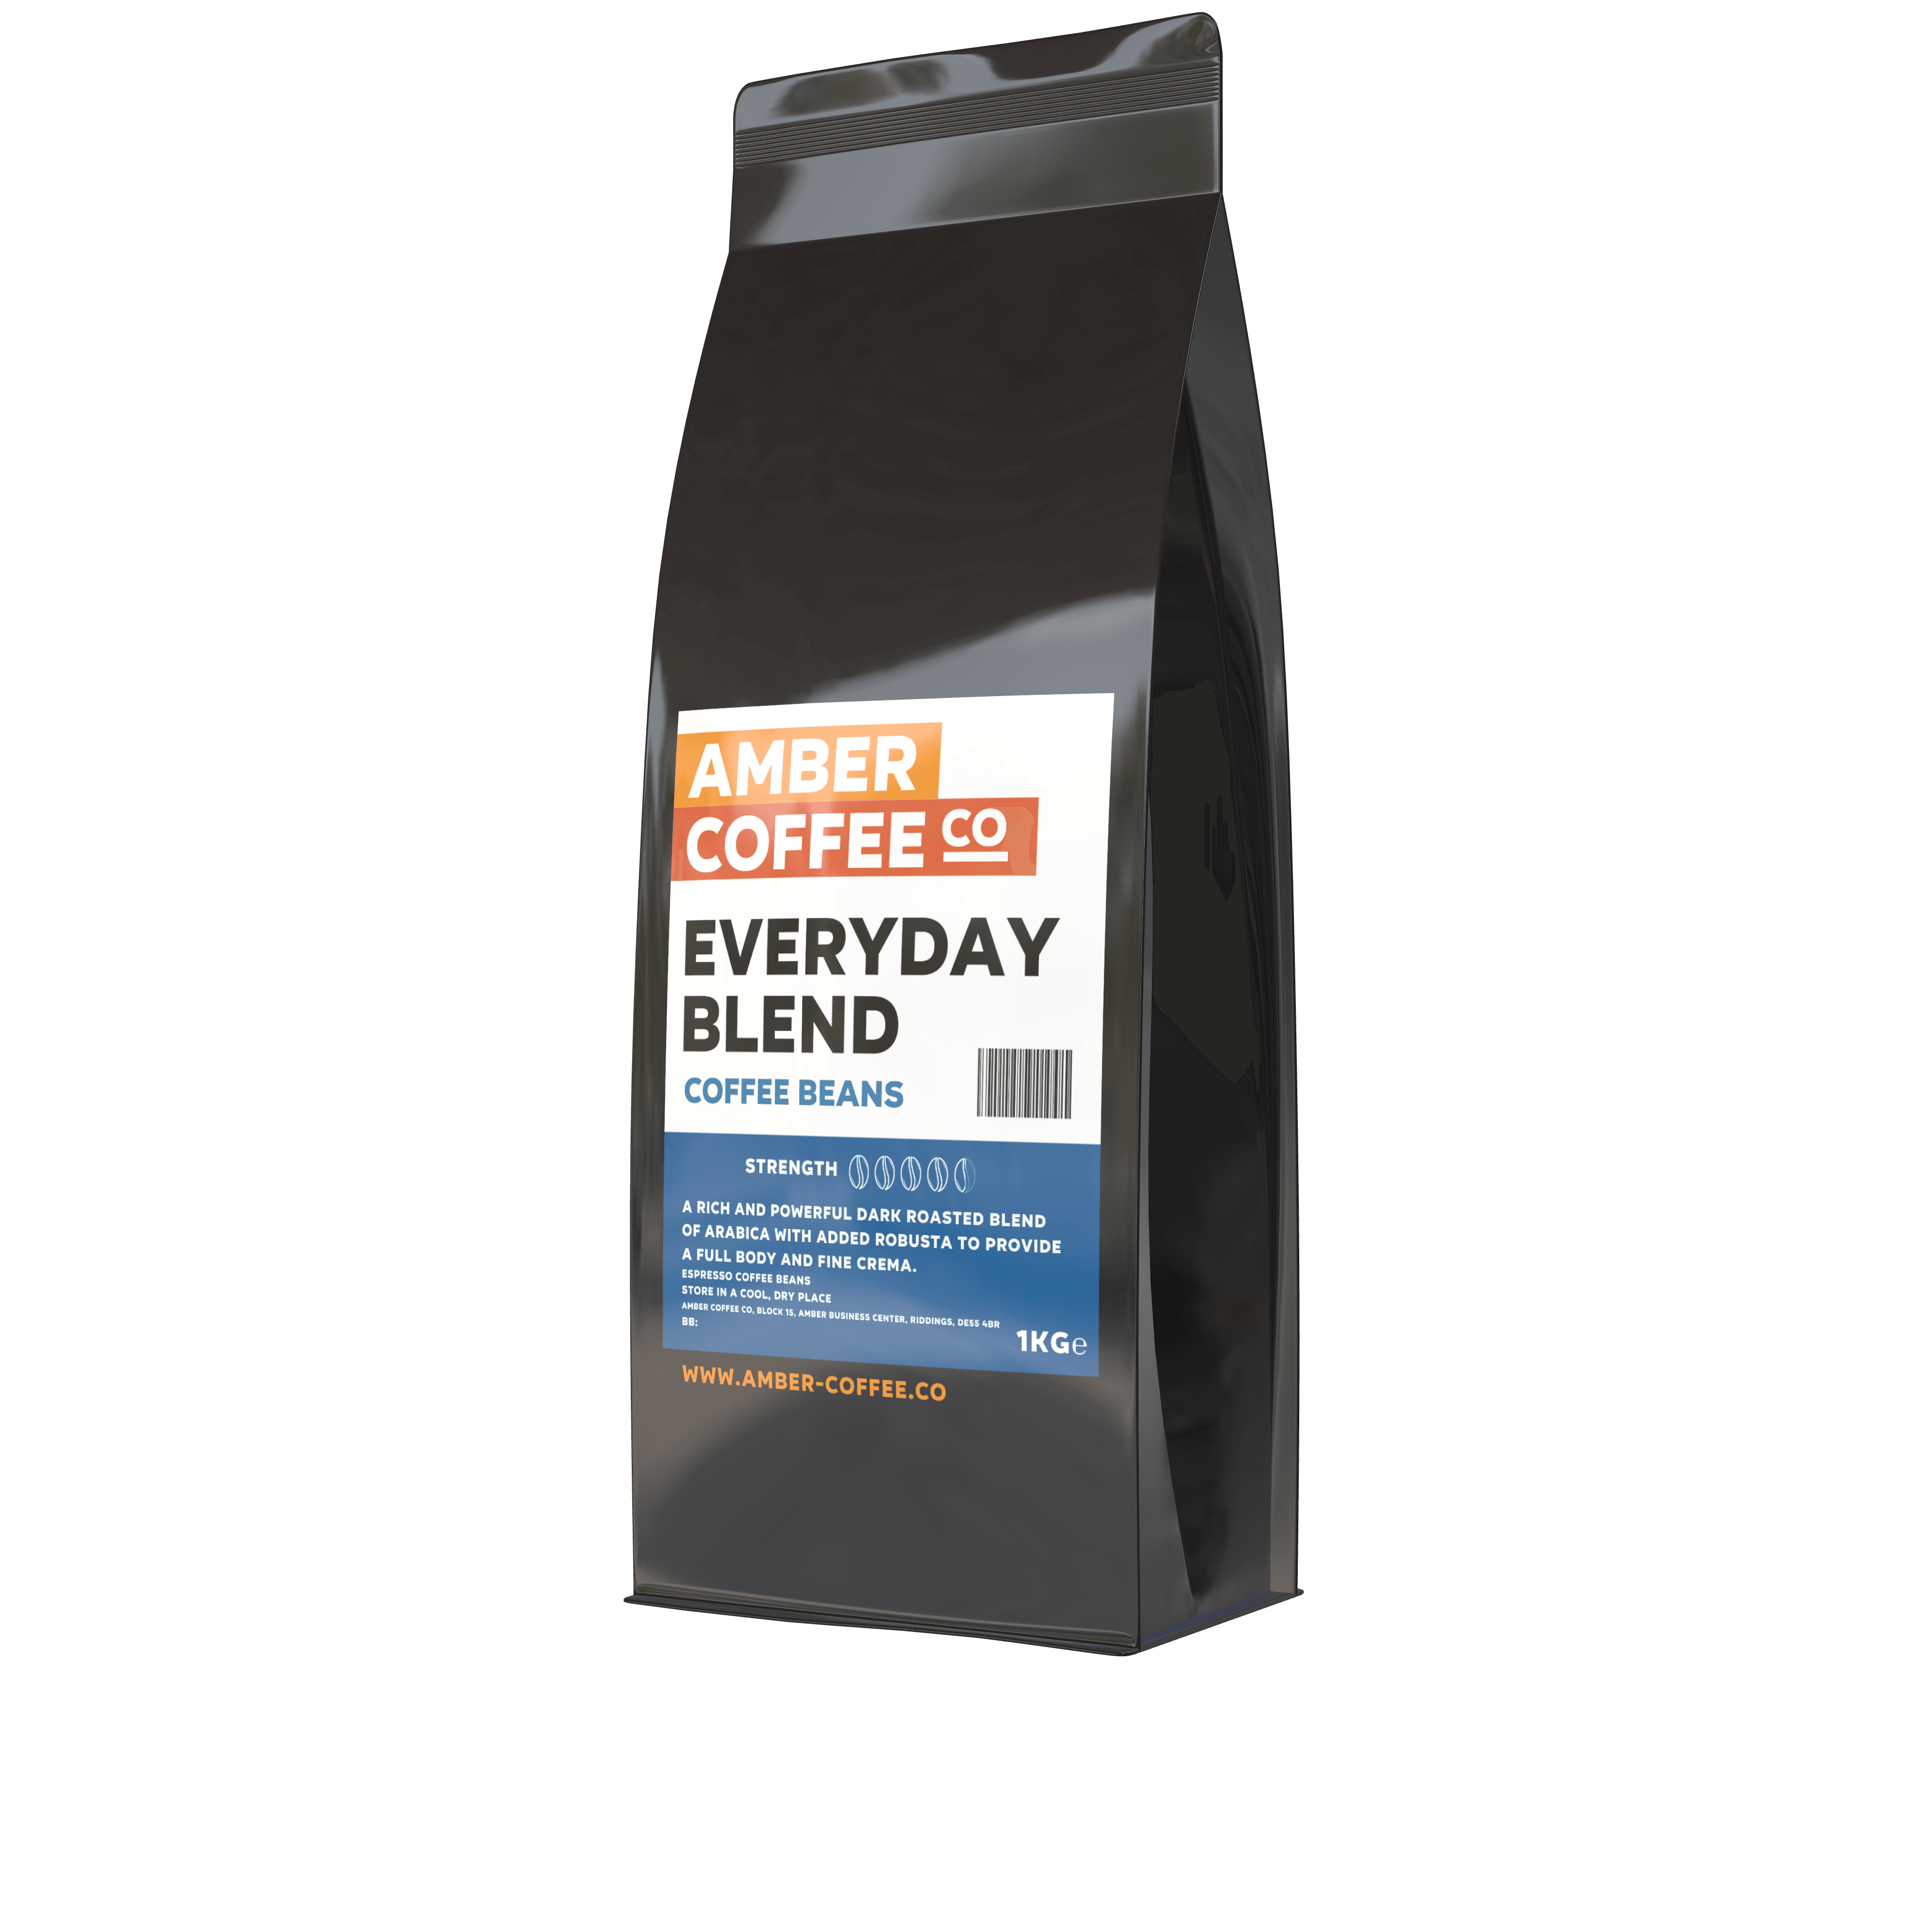 Amber Coffee Co - Everyday Blend - Premium Coffee Beans (Full Case or 1KG Bags) - Vending Superstore